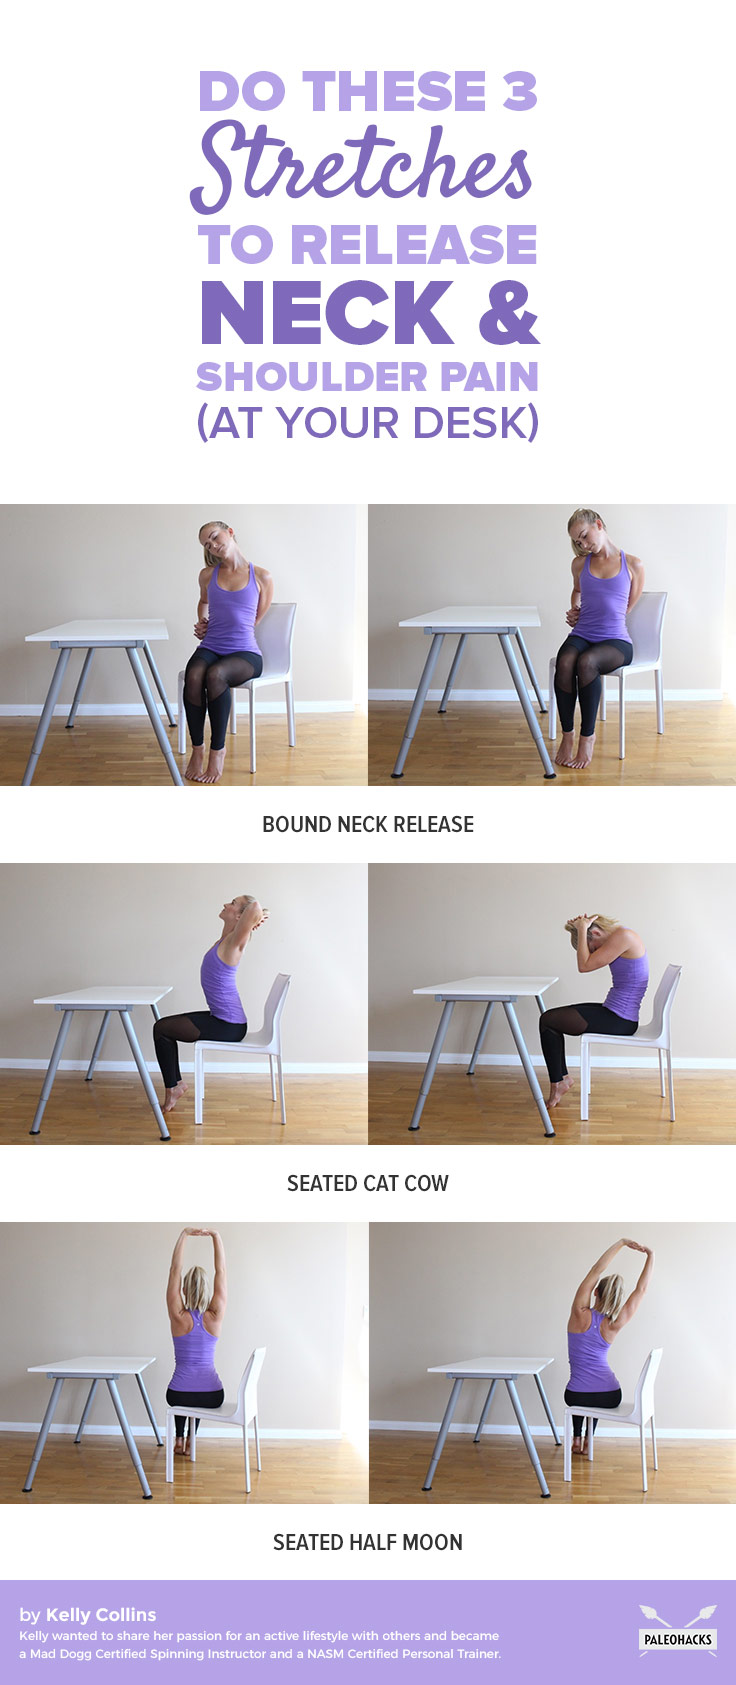 Take a break from work and try these easy stretches at your desk to release neck and shoulder pain.